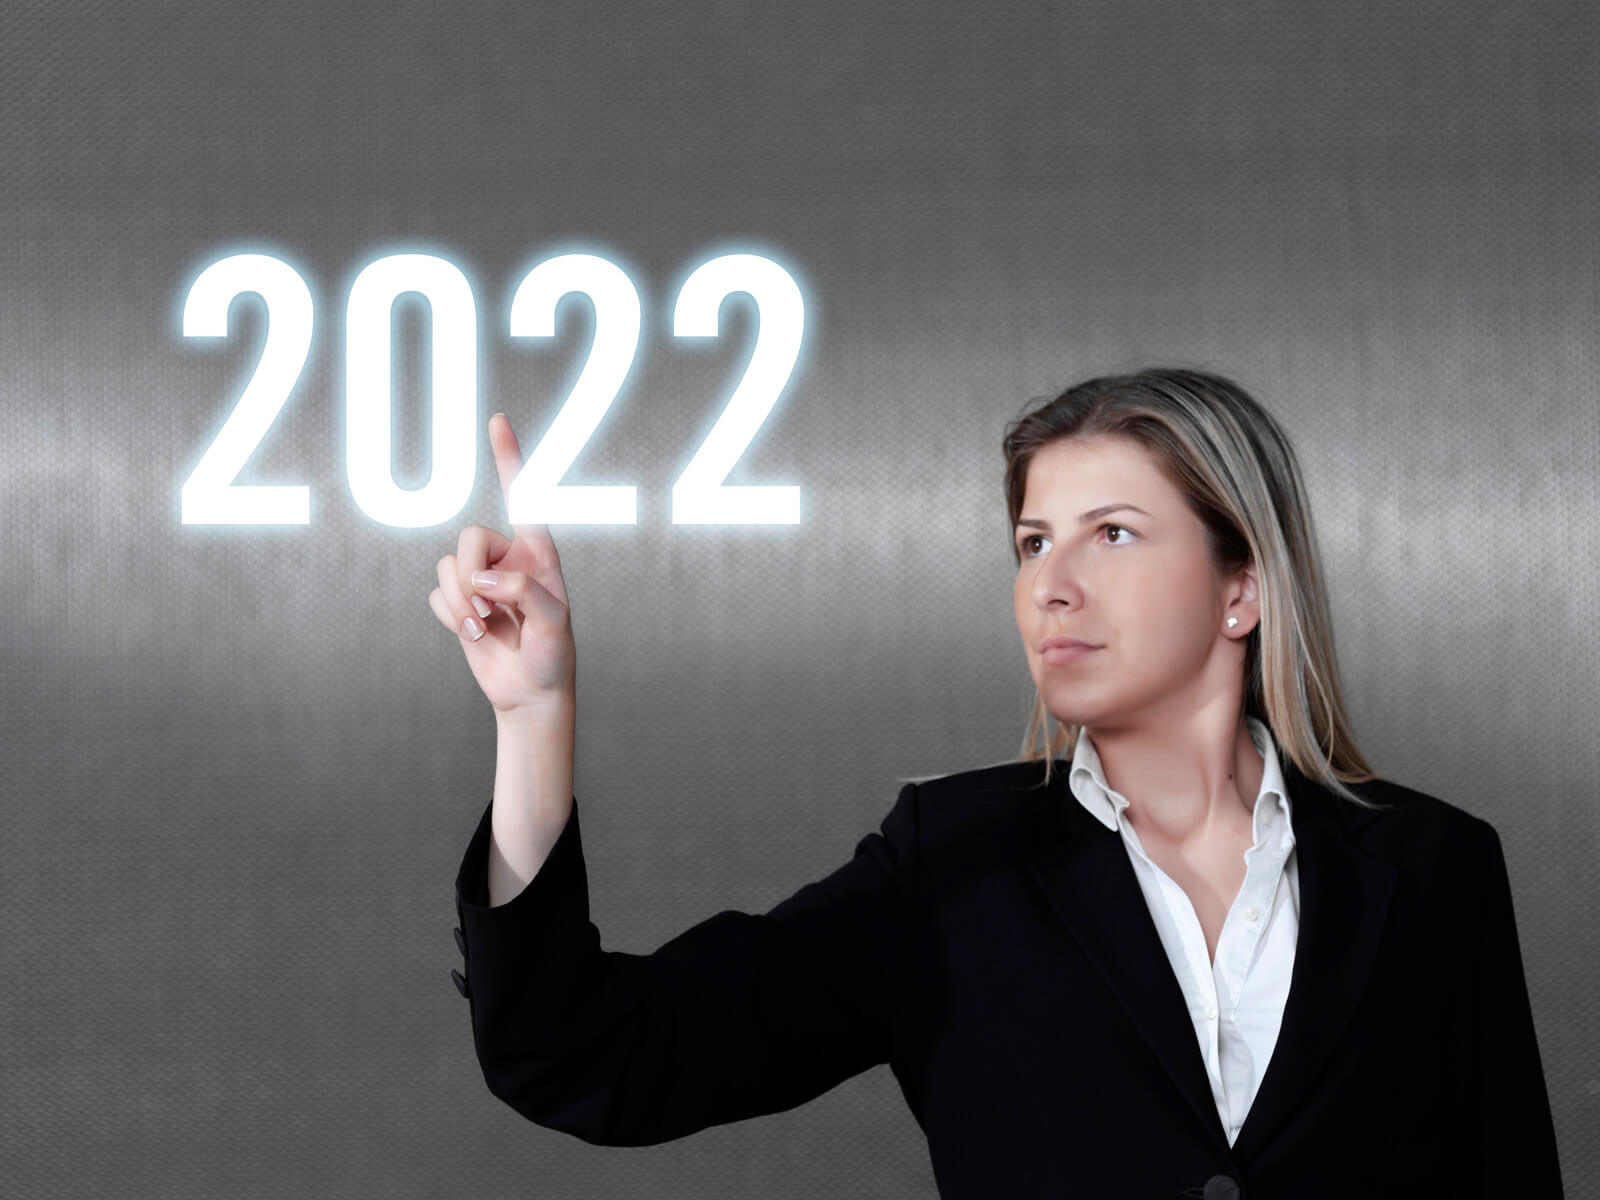 Planning for 2022 - Prepare Your Company Now!